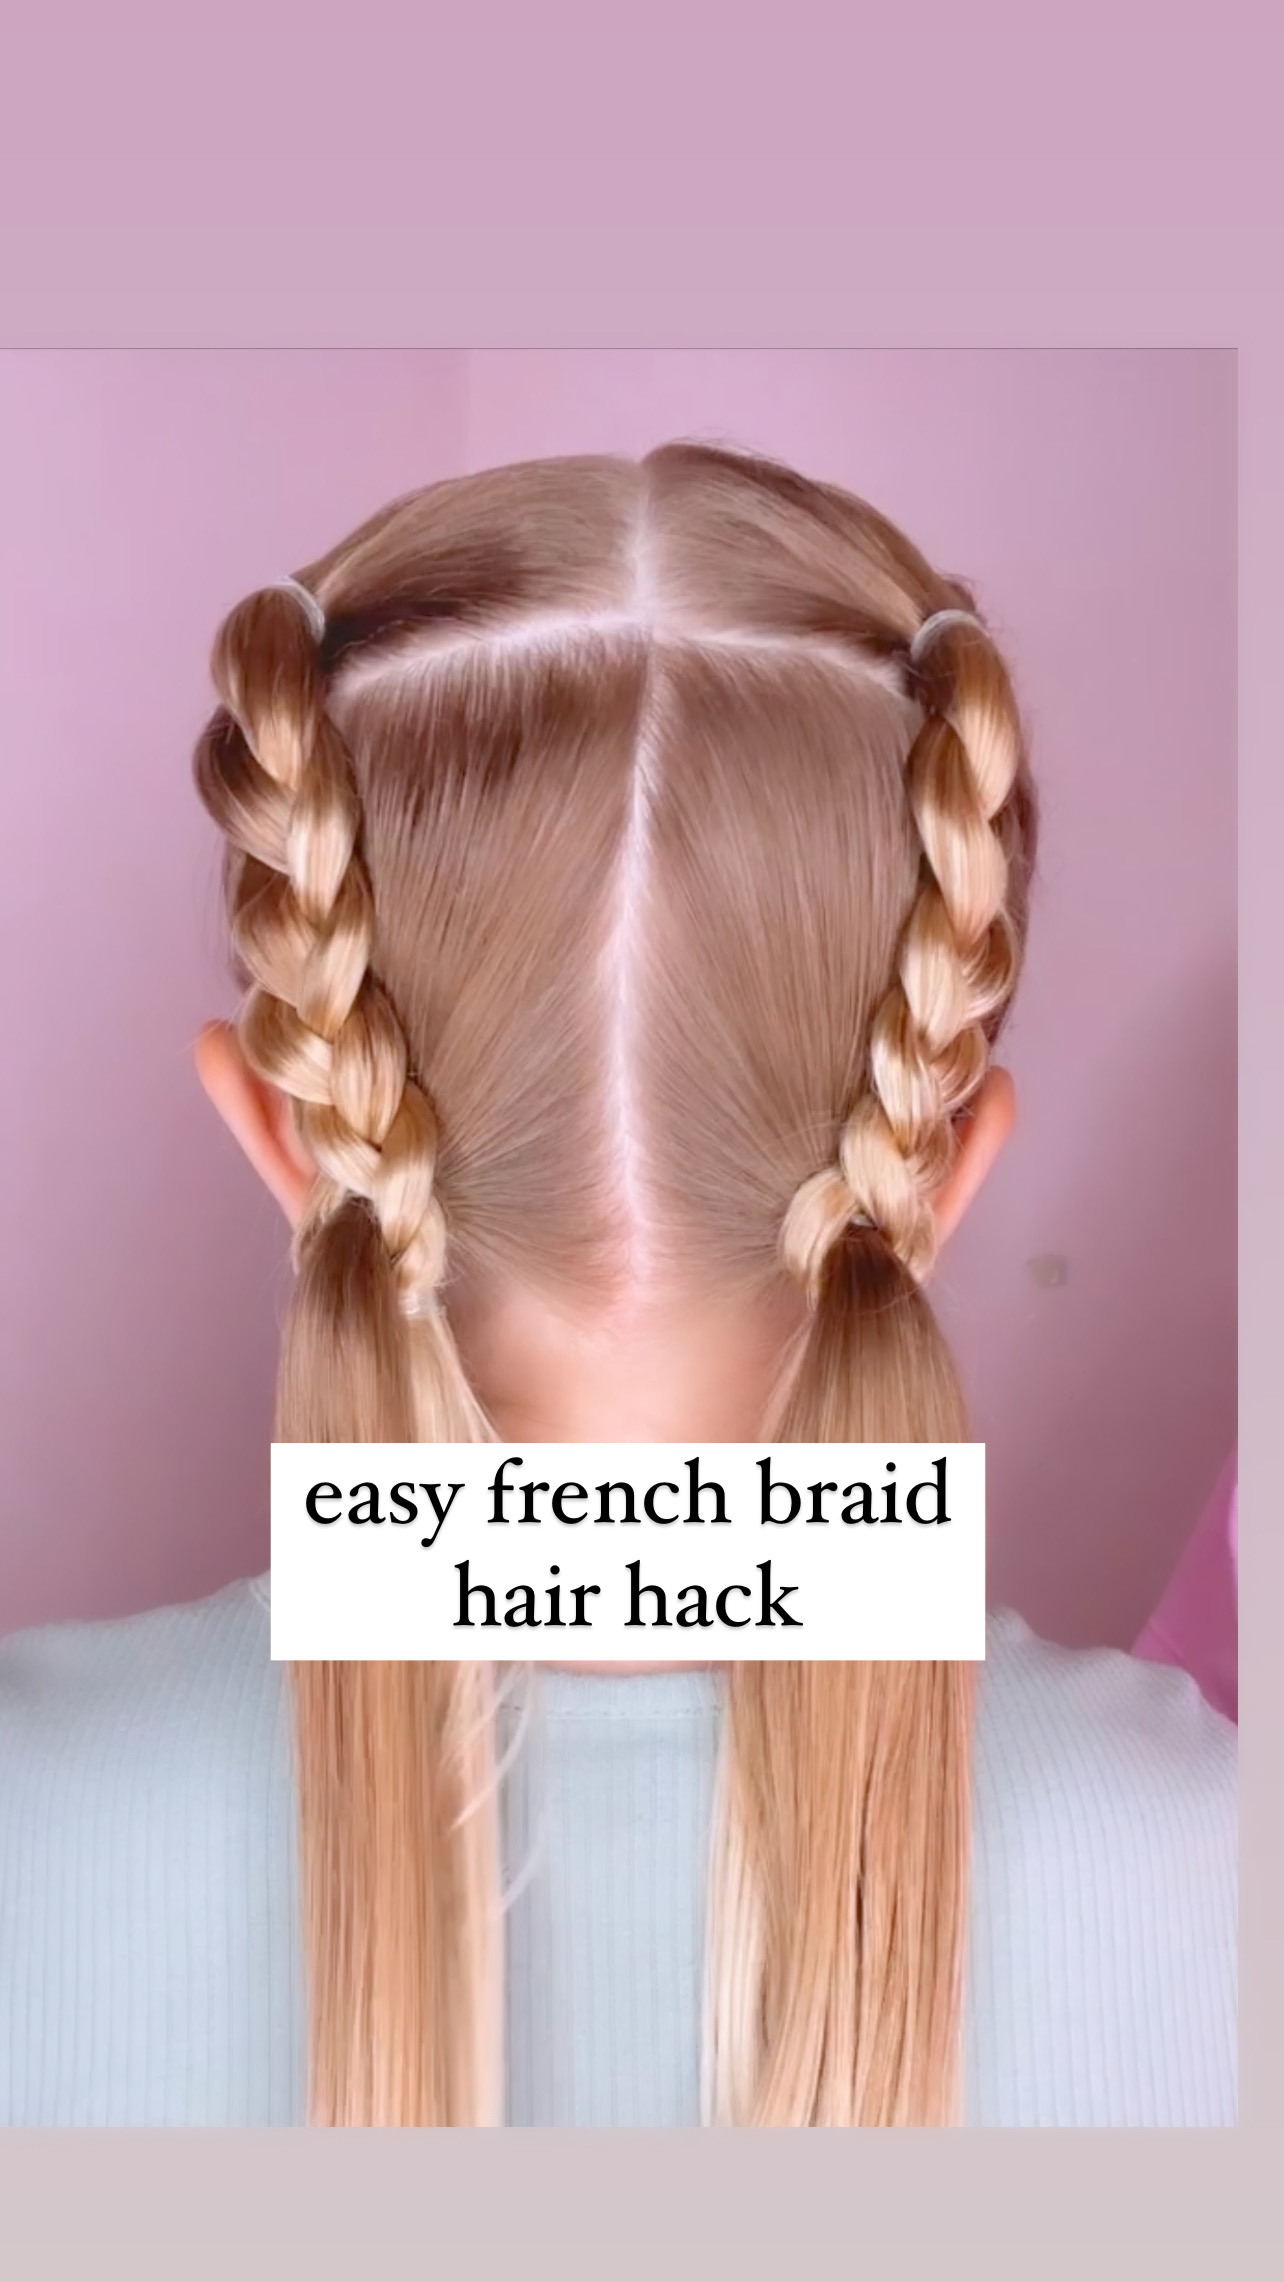 2023's Hottest French Braid Hairstyles: Trending Styles and Tutorials